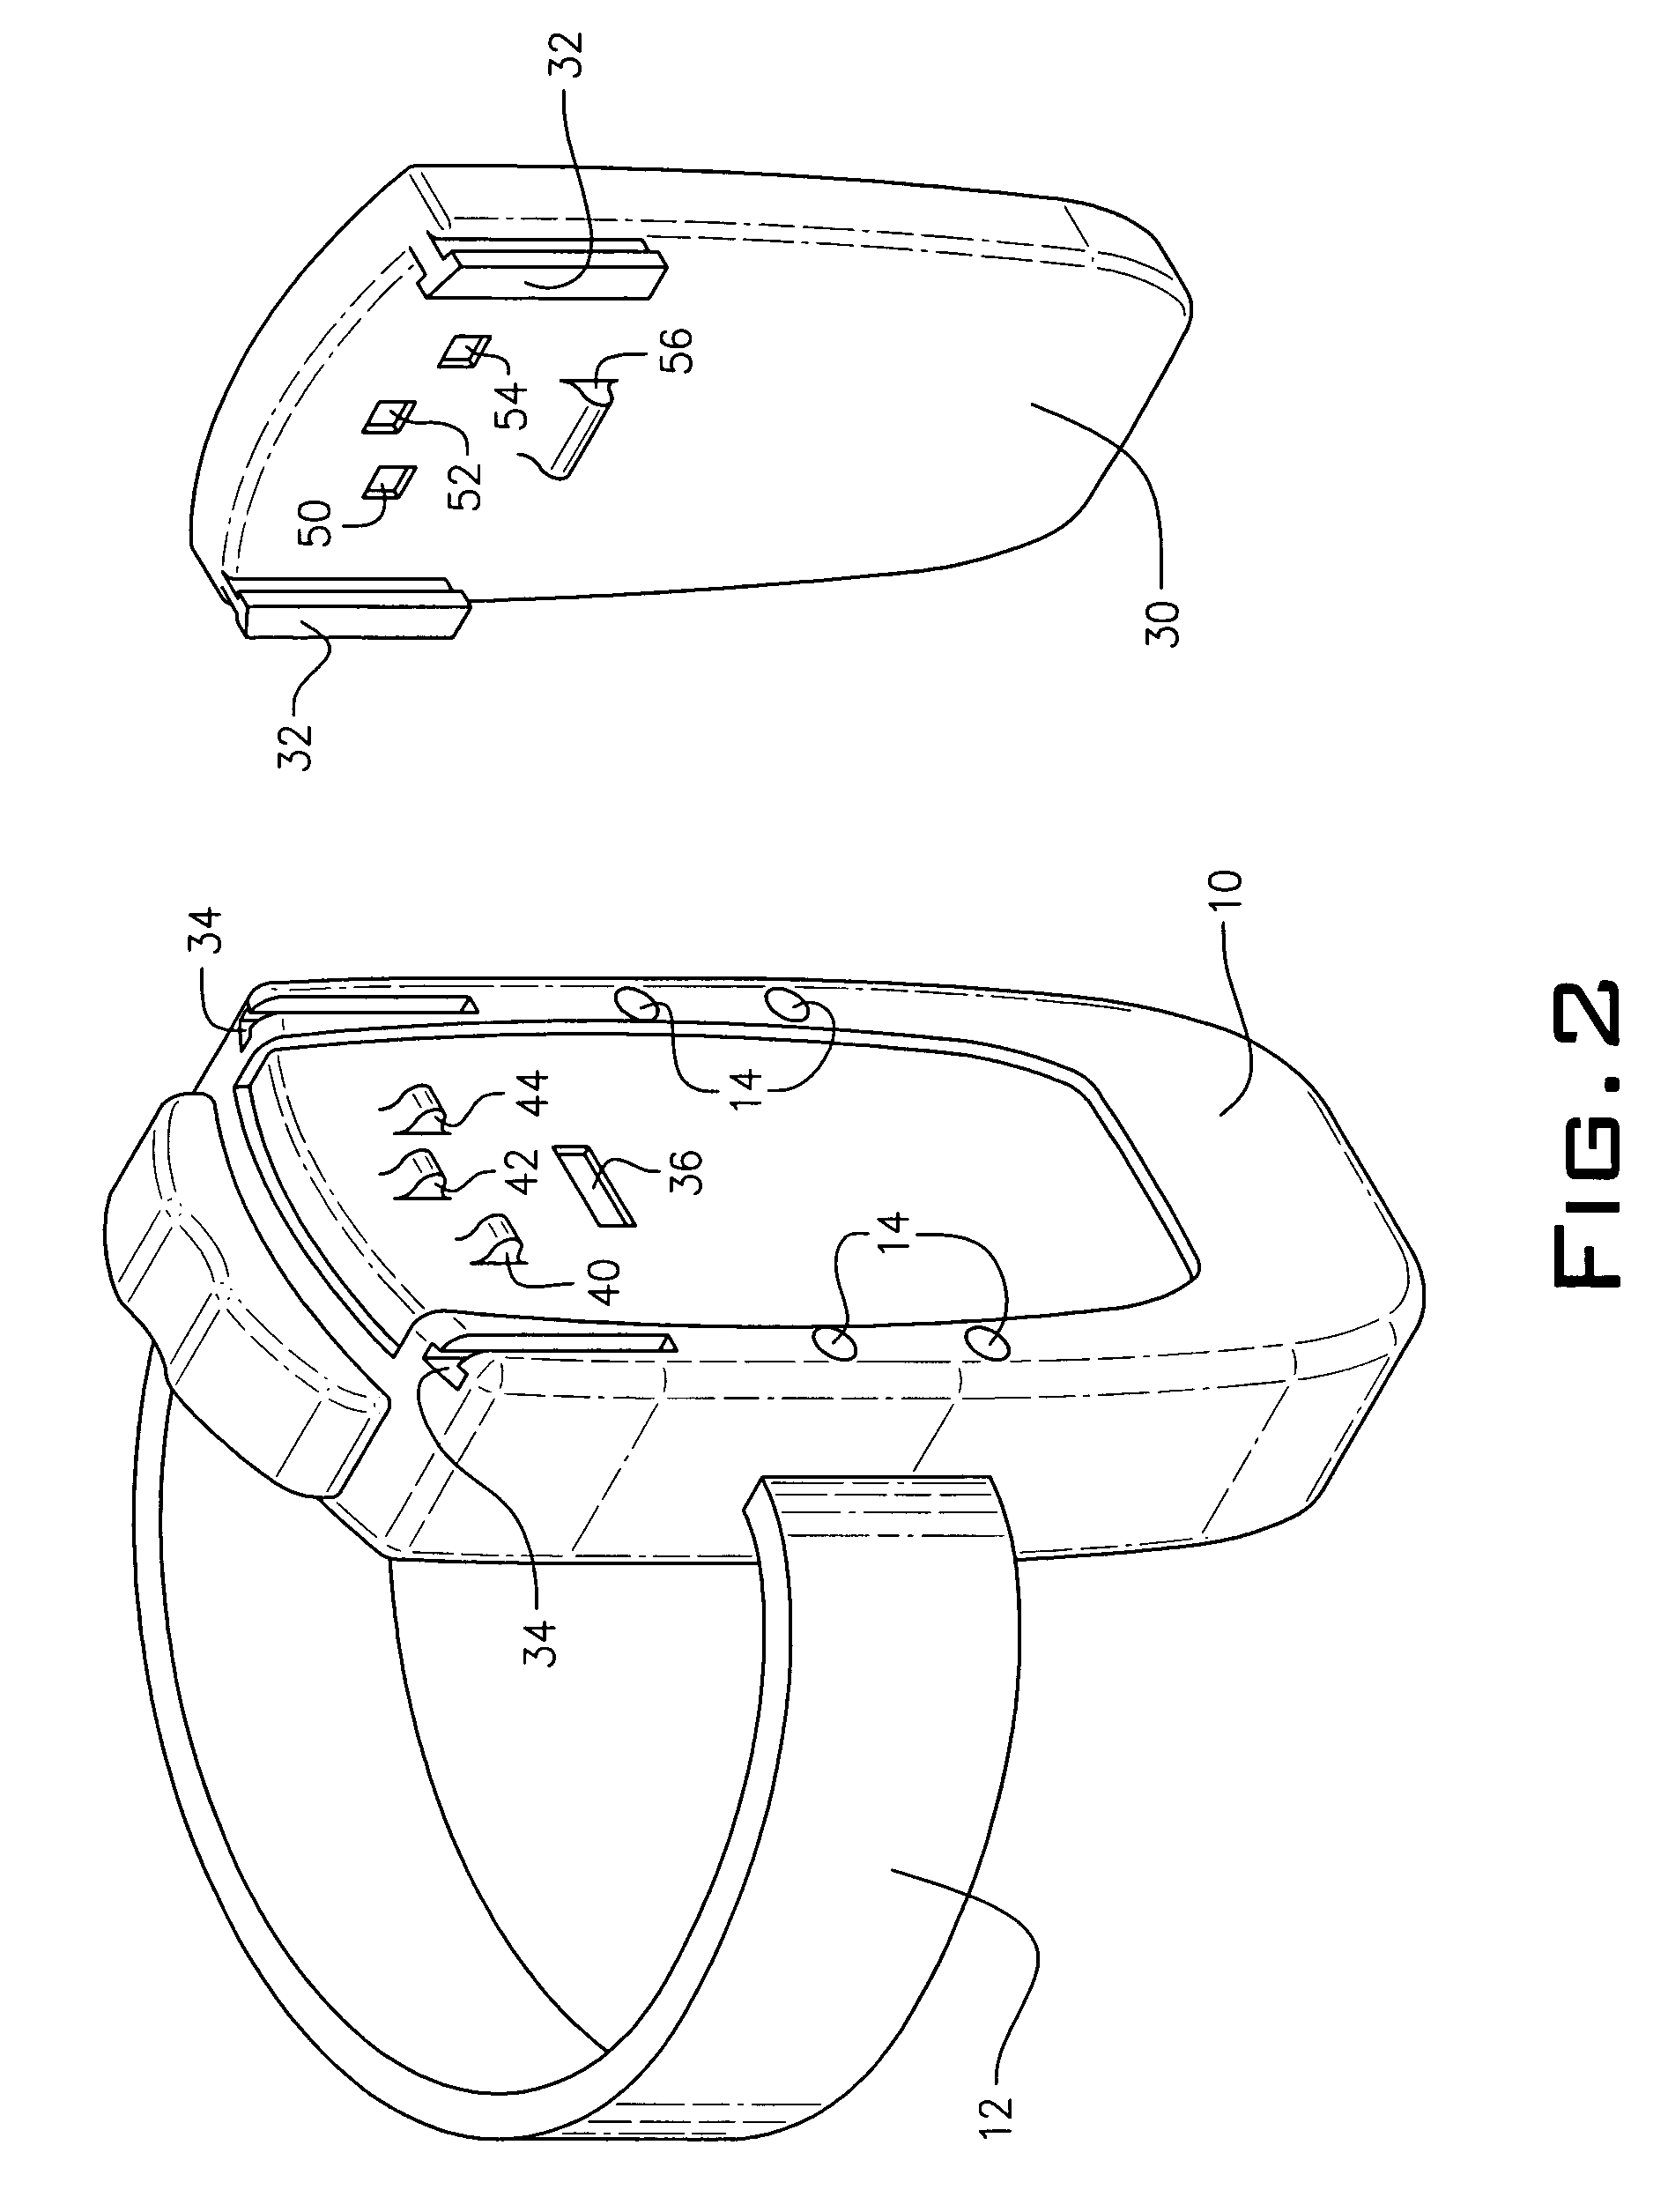 System, method and apparatus for charging a worn device